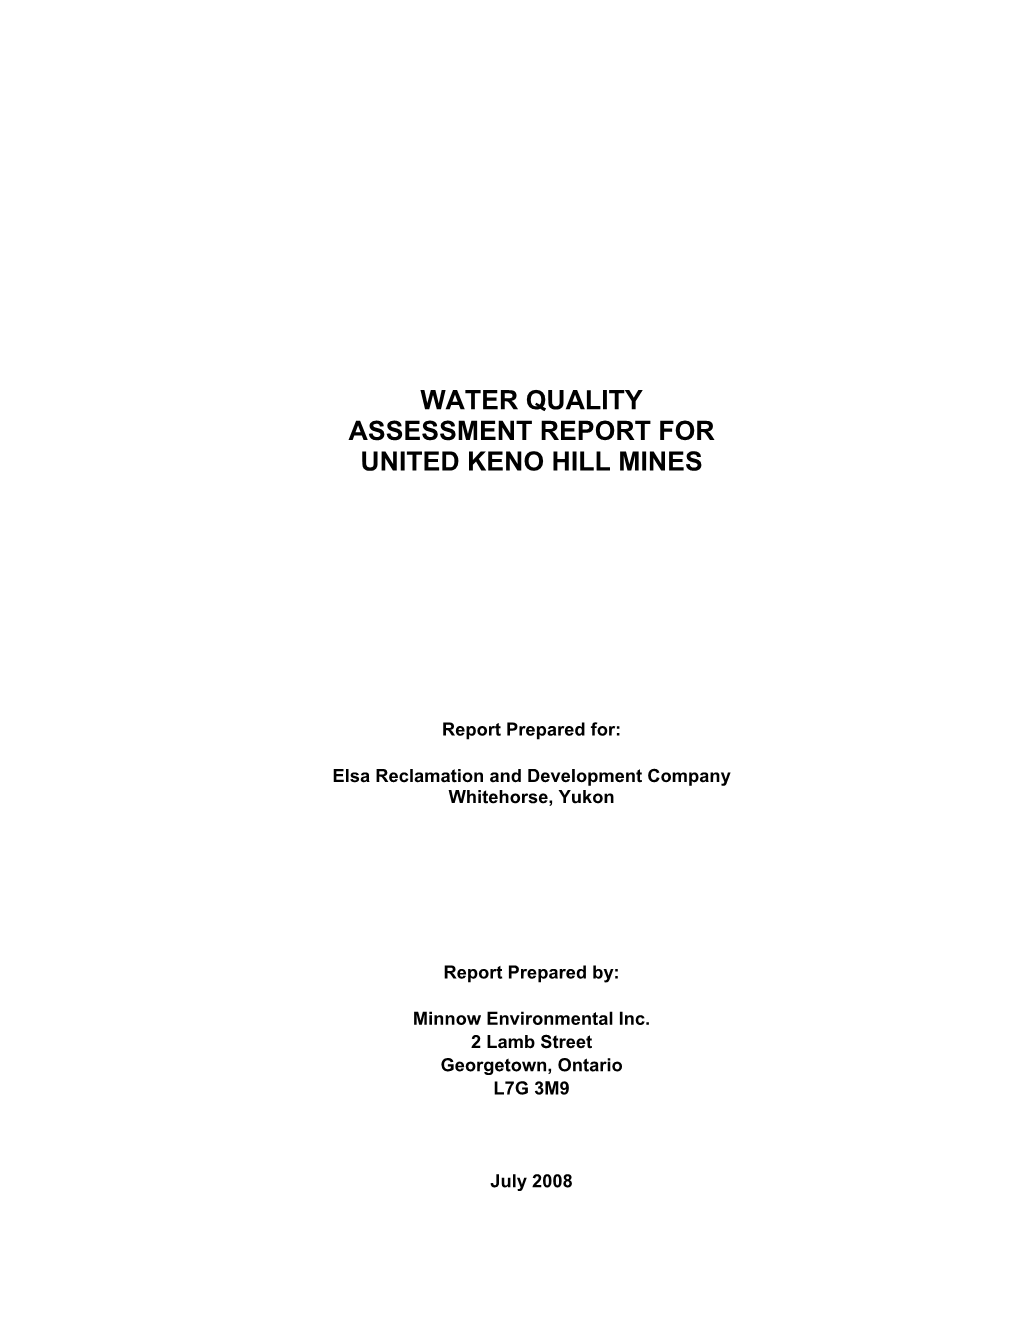 Water Quality Assessment Report for United Keno Hill Mines